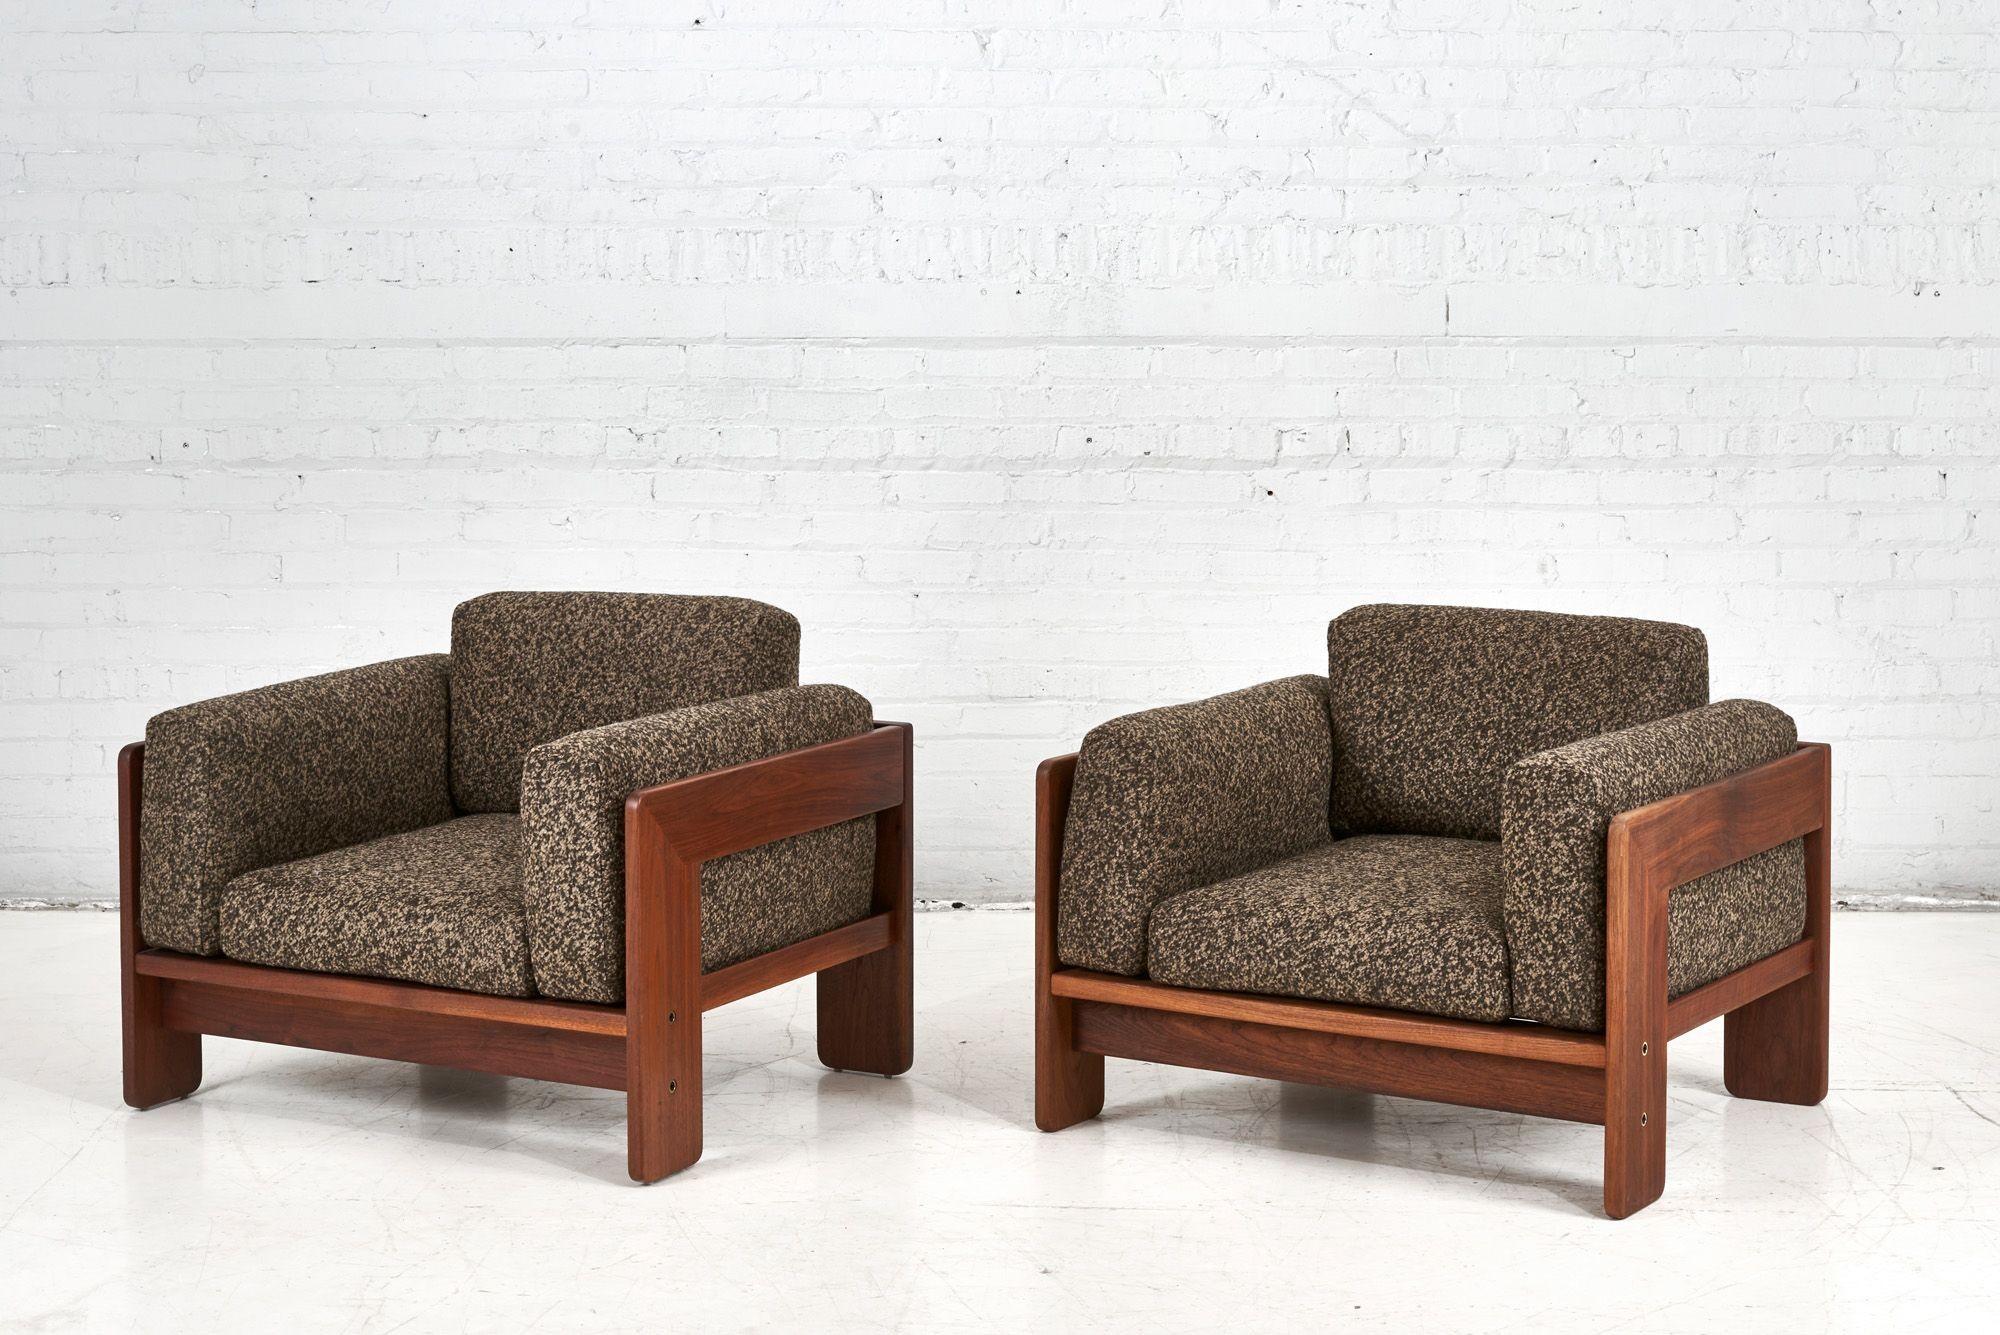 Pair Bastiano lounge chairs by Tobia Scarpa for Gavina, Italy, 1970. Chairs have been completely restored and reupholstered in a nubby boucle.